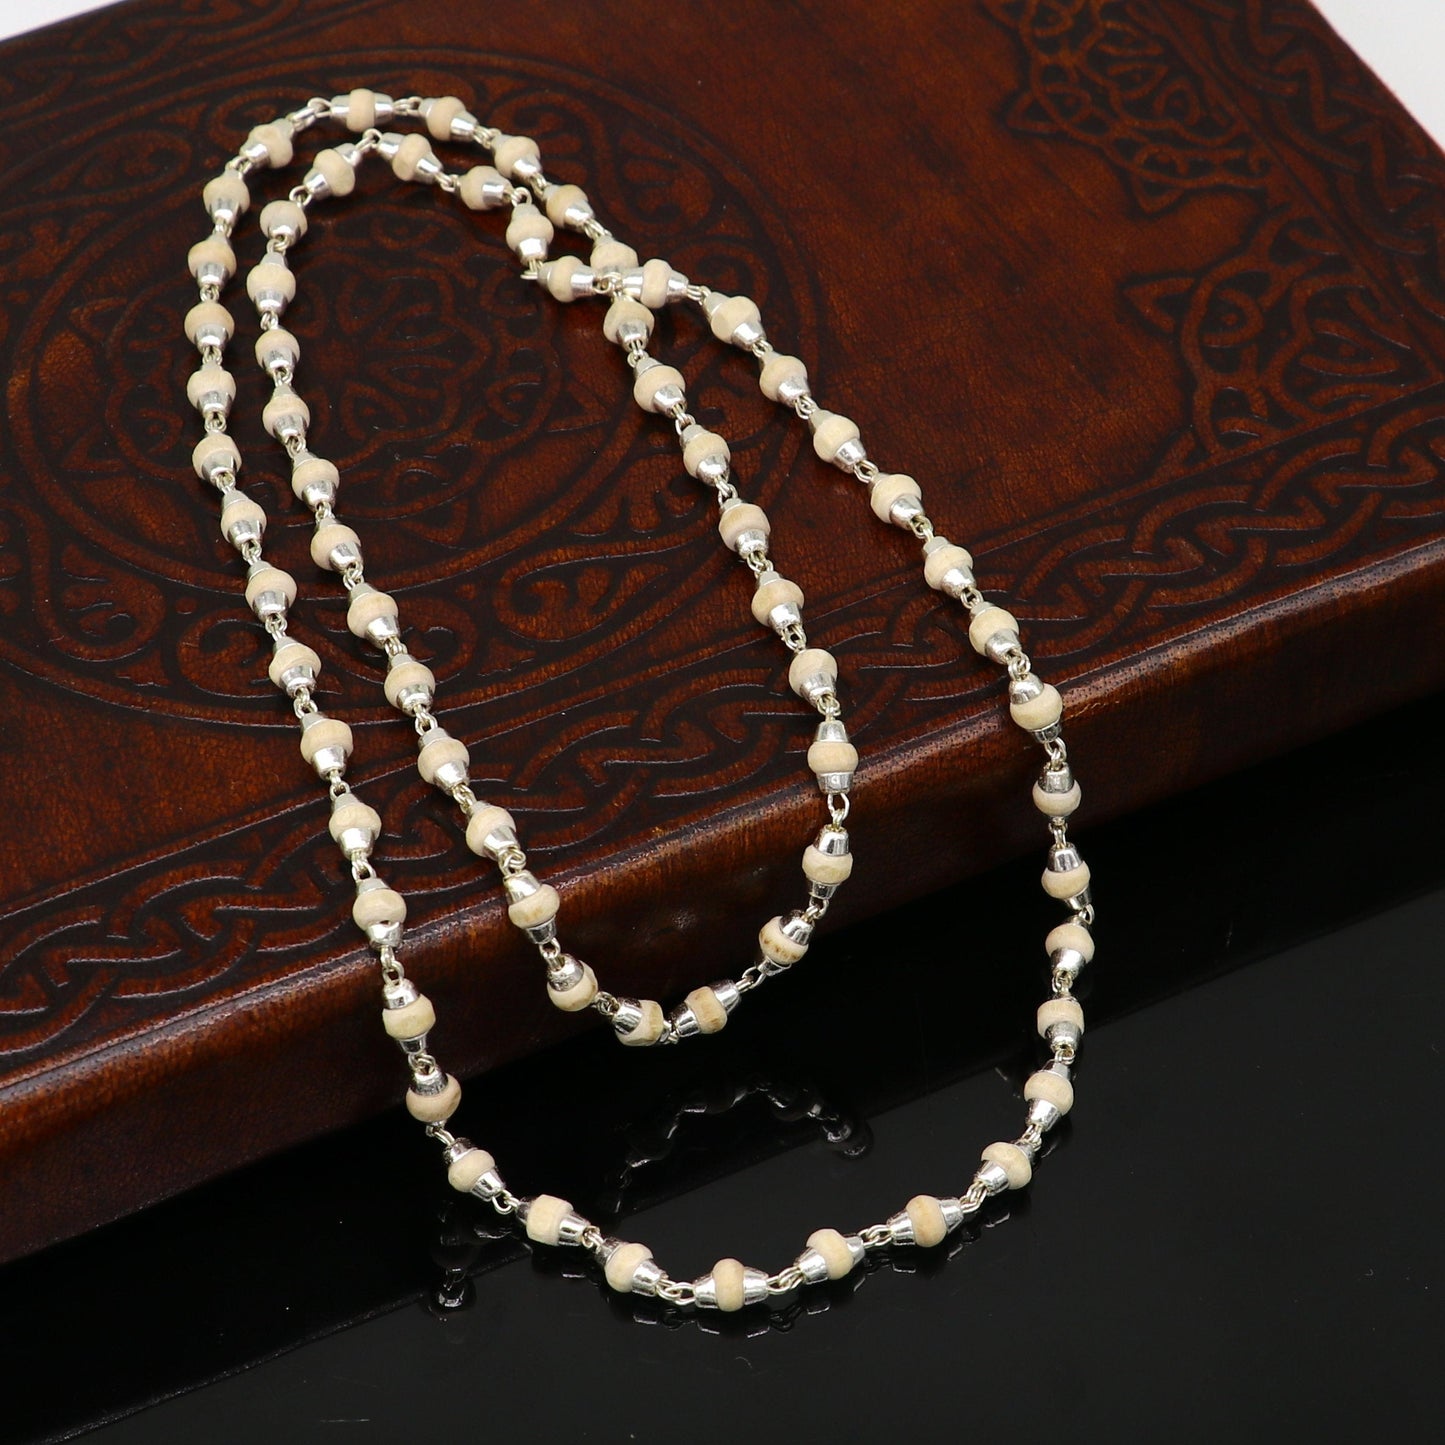 925 sterling silver customized basil rosary wooden beads solid chain necklace, excellent 24" unisex stylish necklace from india ch103 - TRIBAL ORNAMENTS